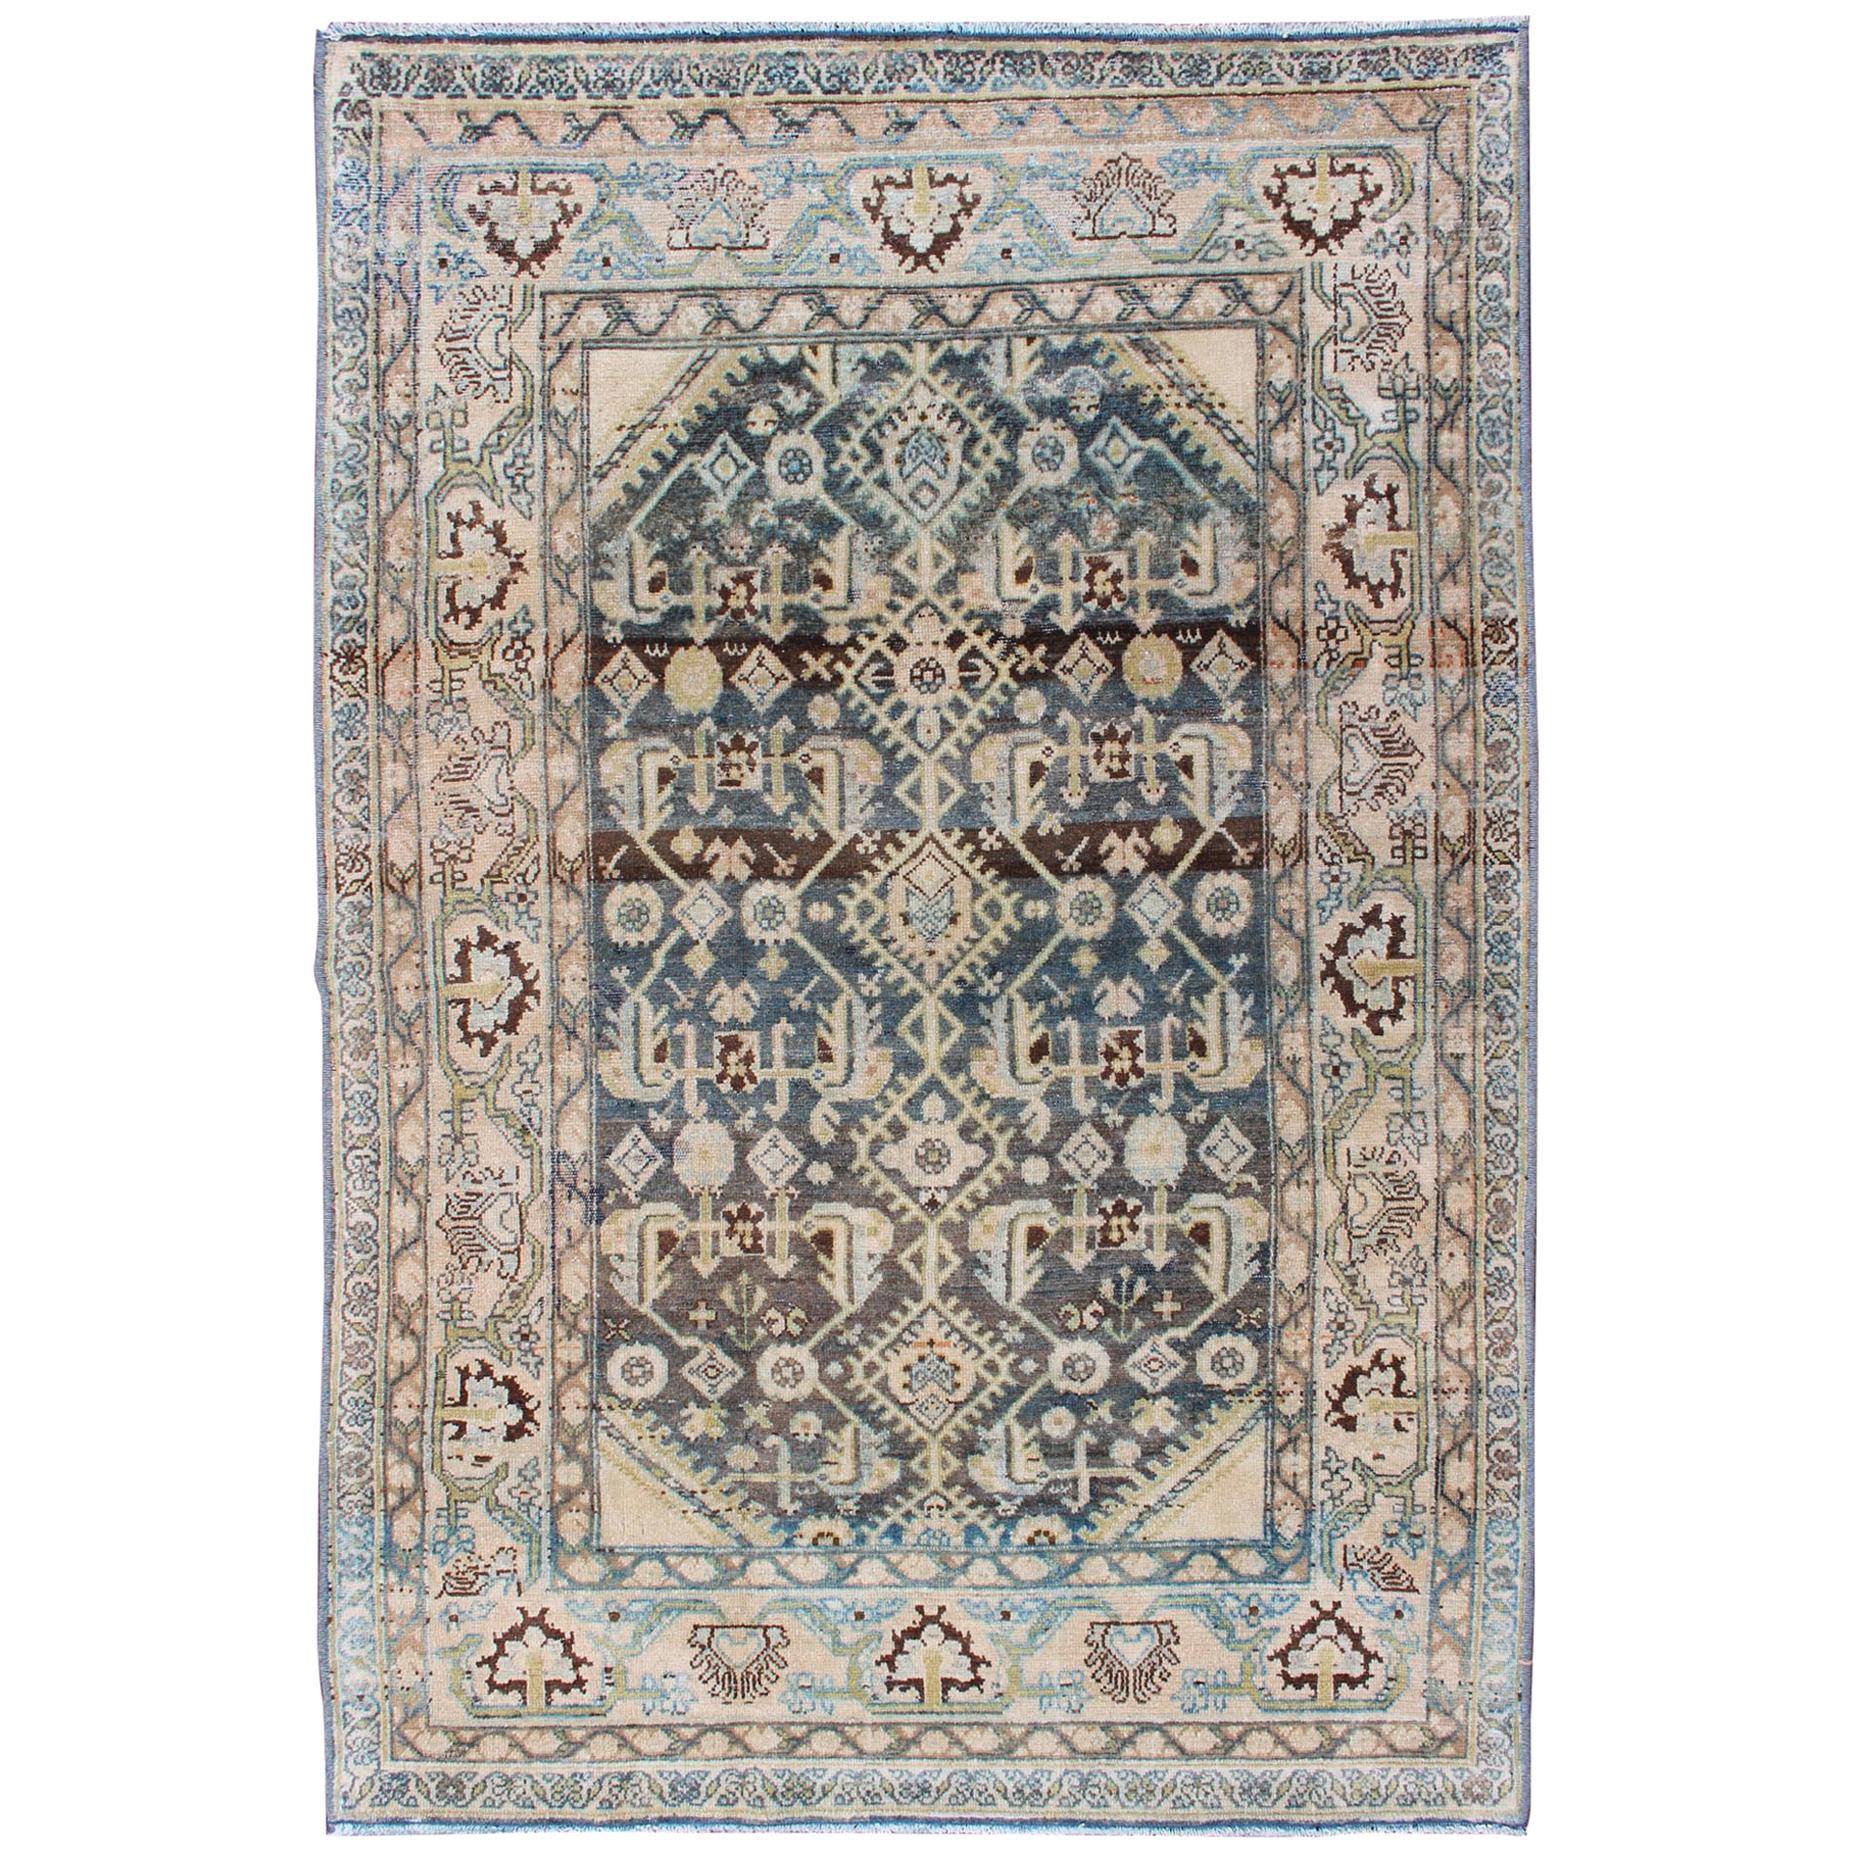 Persian Malayer Rug with All-Over Design in Gray, Blue, Cream, Pink Tones